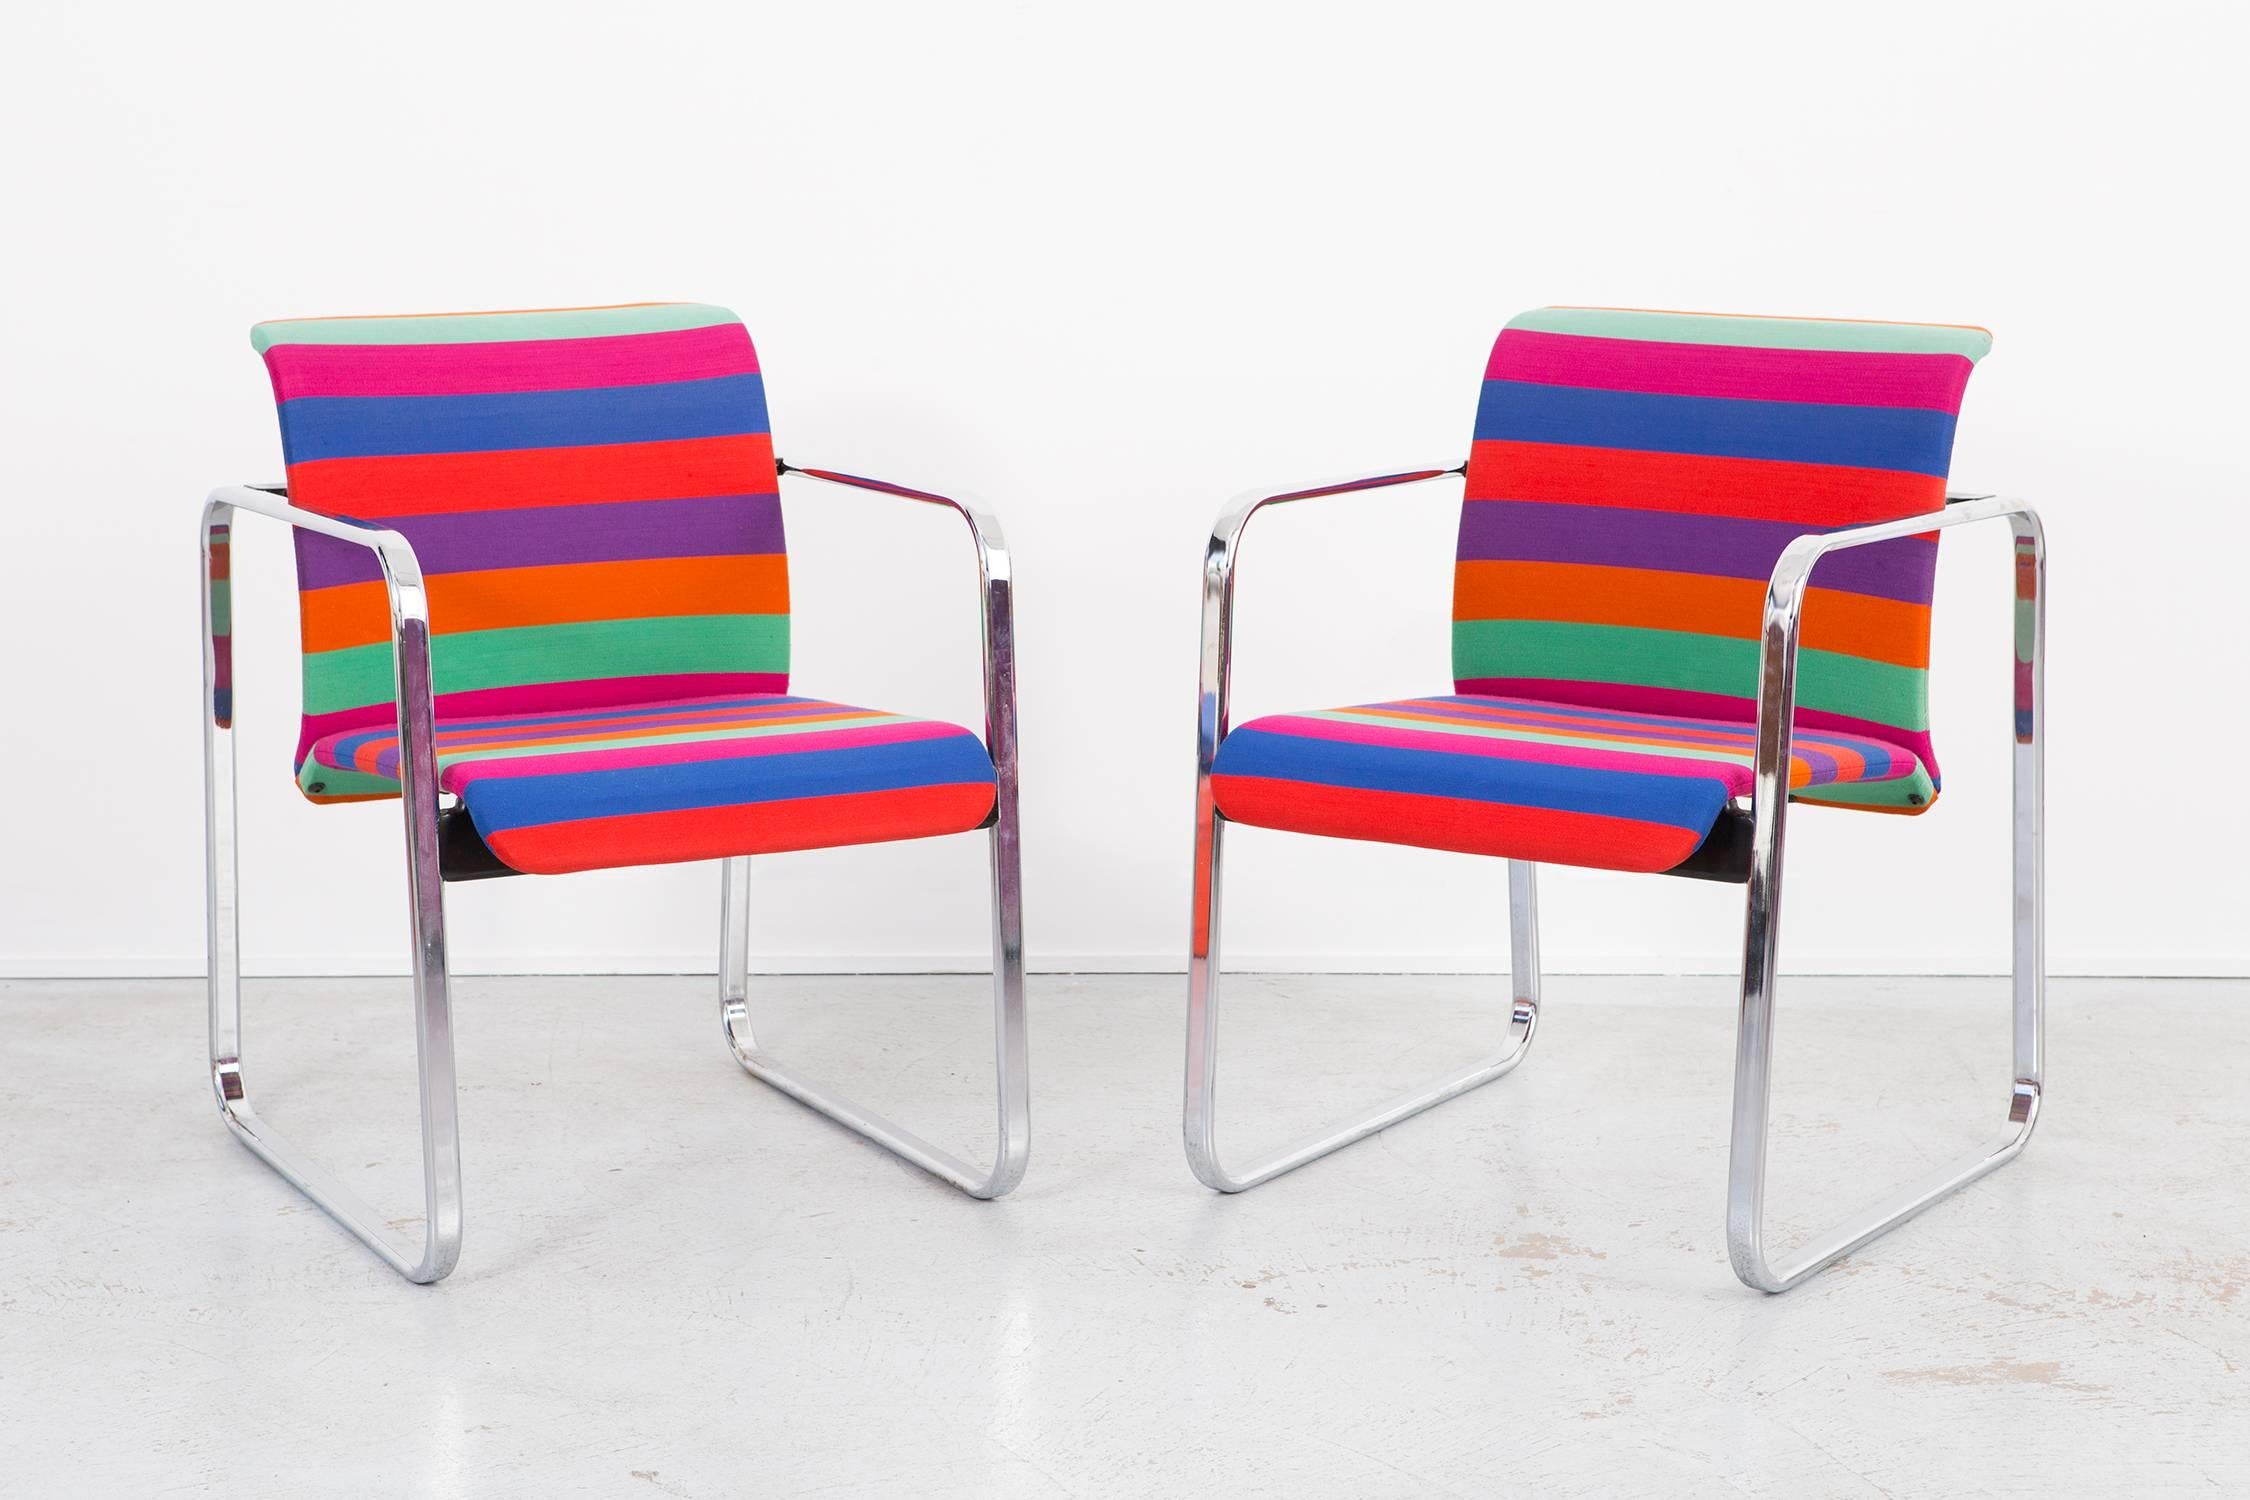 Mid-20th Century Chromatic and Vibrant Conference or Dining Chair Set in Alexander Girard Fabric